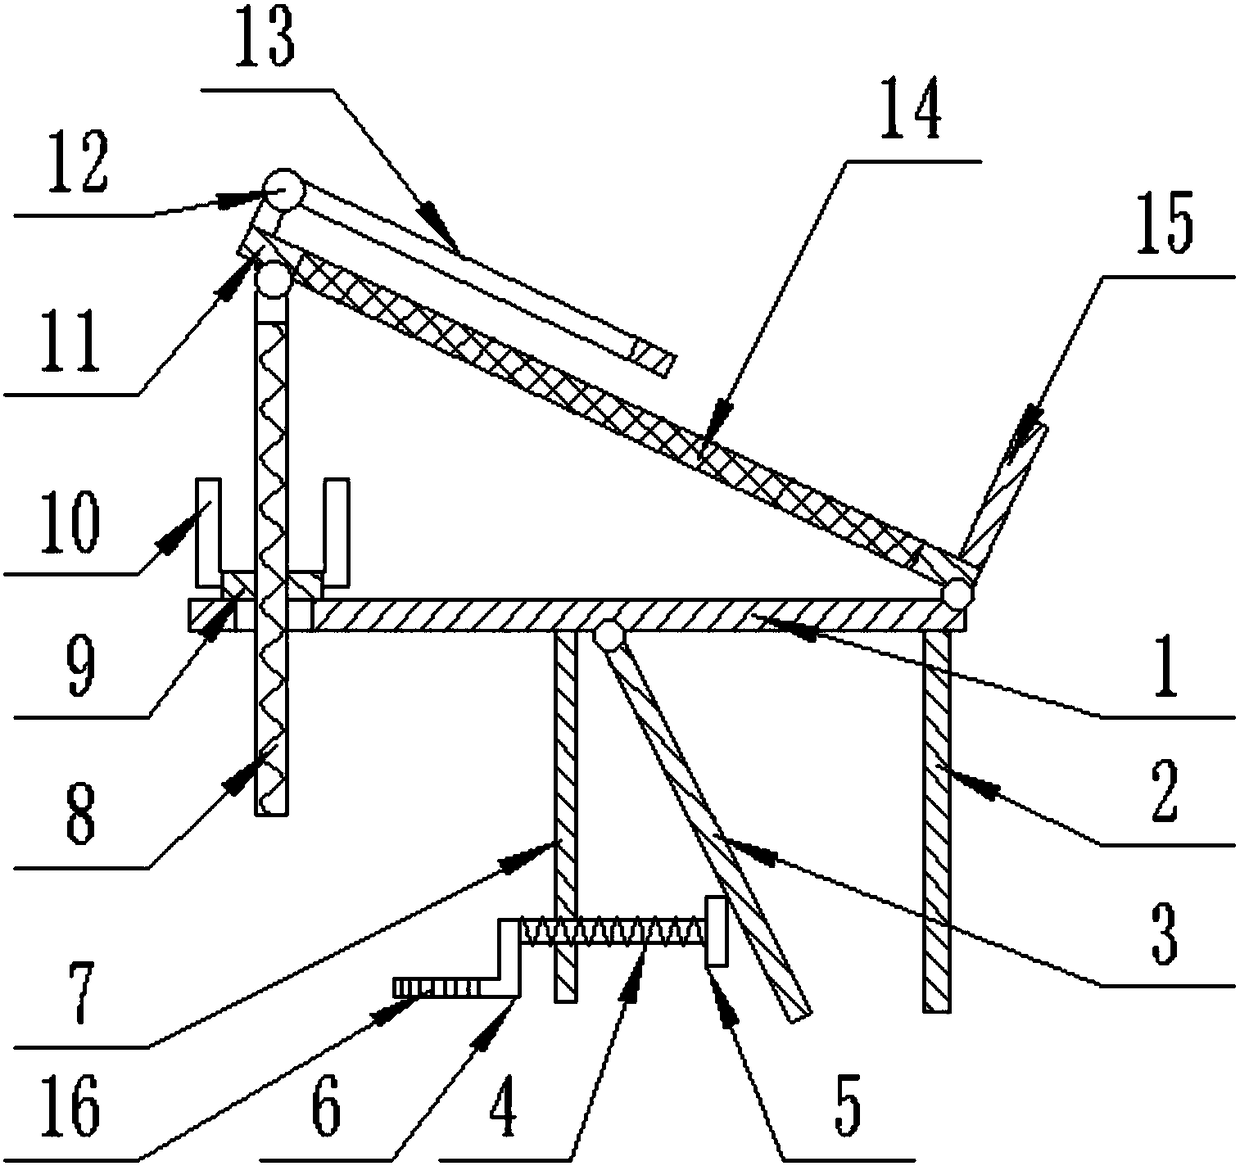 Shoe supporting, airing and placing device for balcony